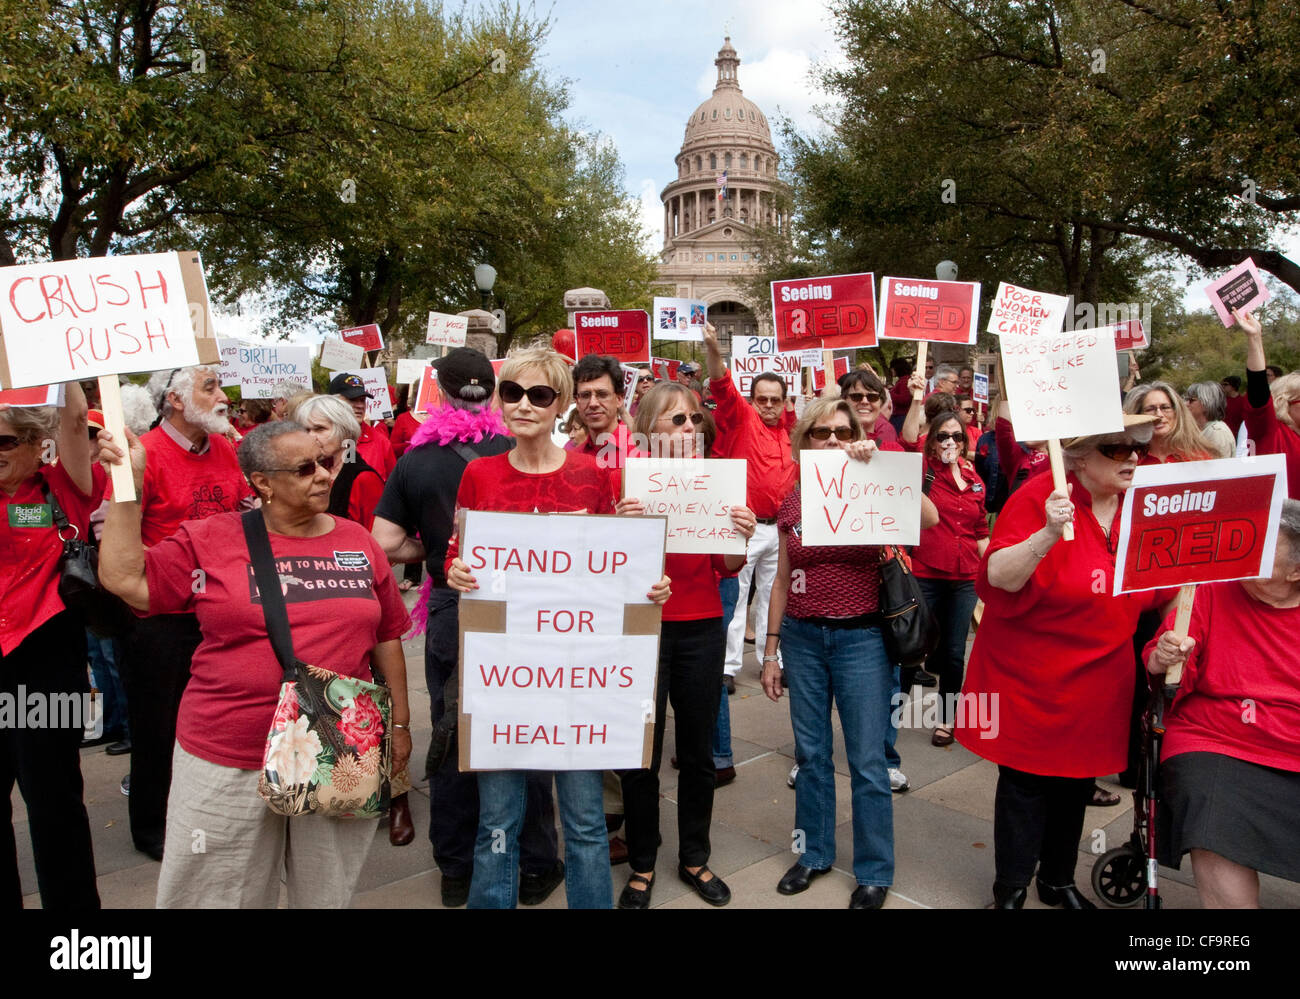 Crowd in front of Texas Capital protests Texas lawmakers' decision that will cut funds to health care for low-income women Stock Photo